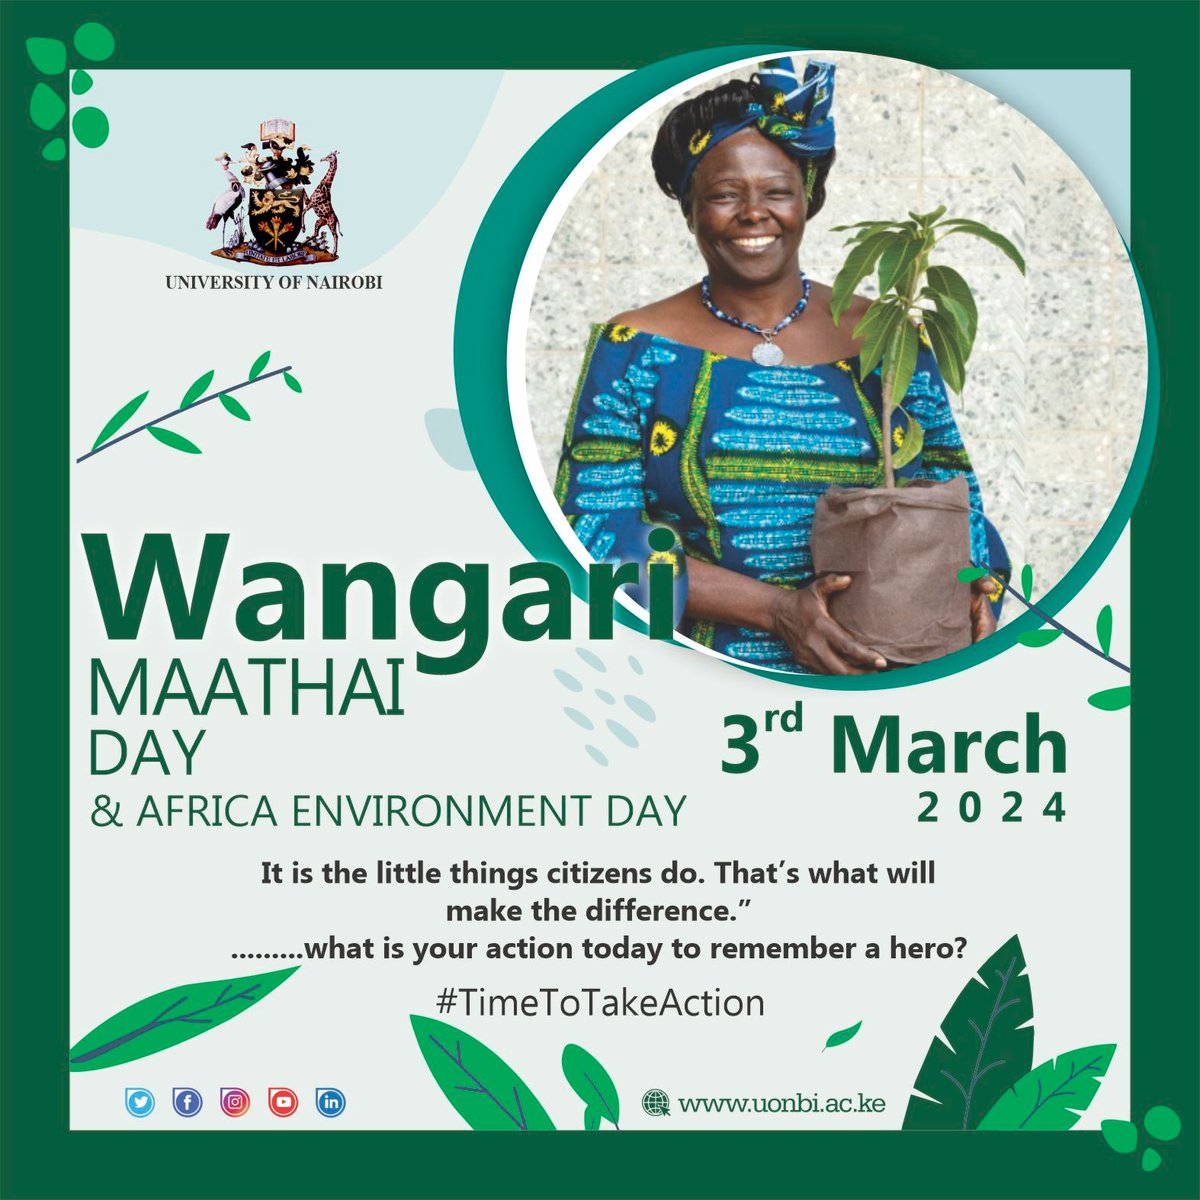 As we commemorate  #WangariMaathaiDay on 3rd March let's remember her words: 'The generation that destroys the #environment  is not the generation that pays the price. That is the problem.' Let's be the generation that makes a difference.   #WeAreUoN #Timetotakeaction

@uonbi